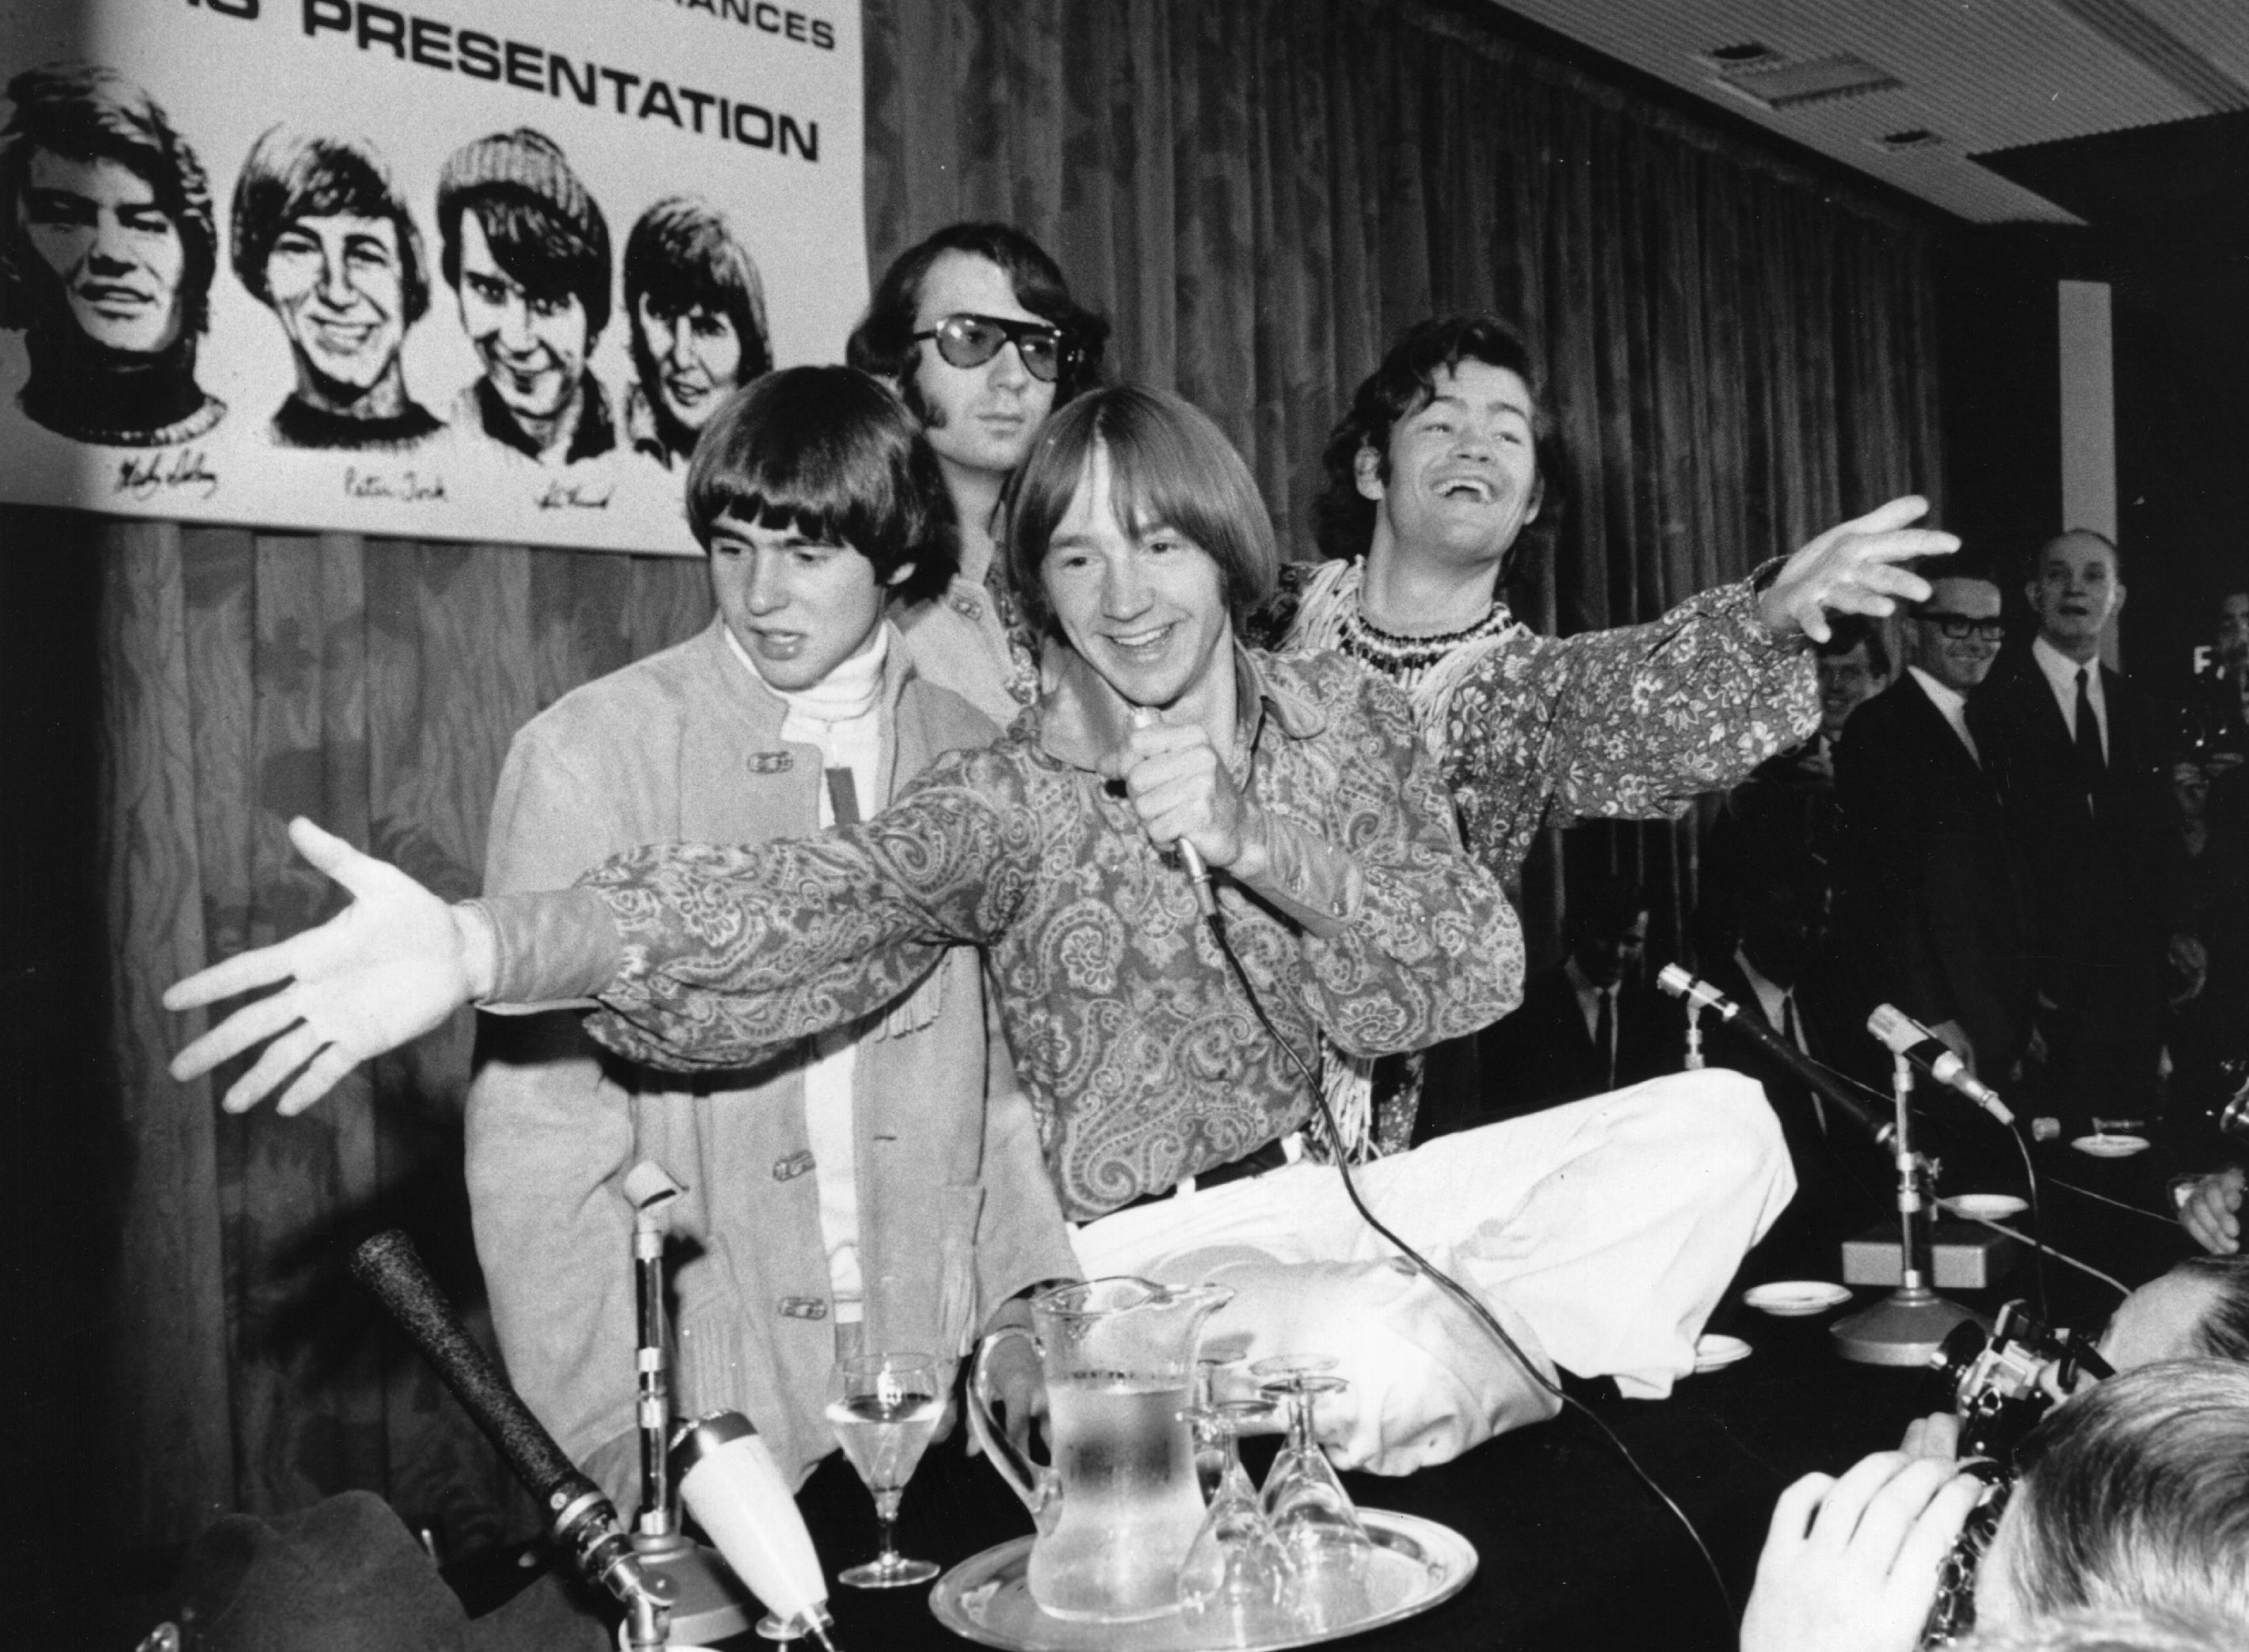 The Monkees near a poster